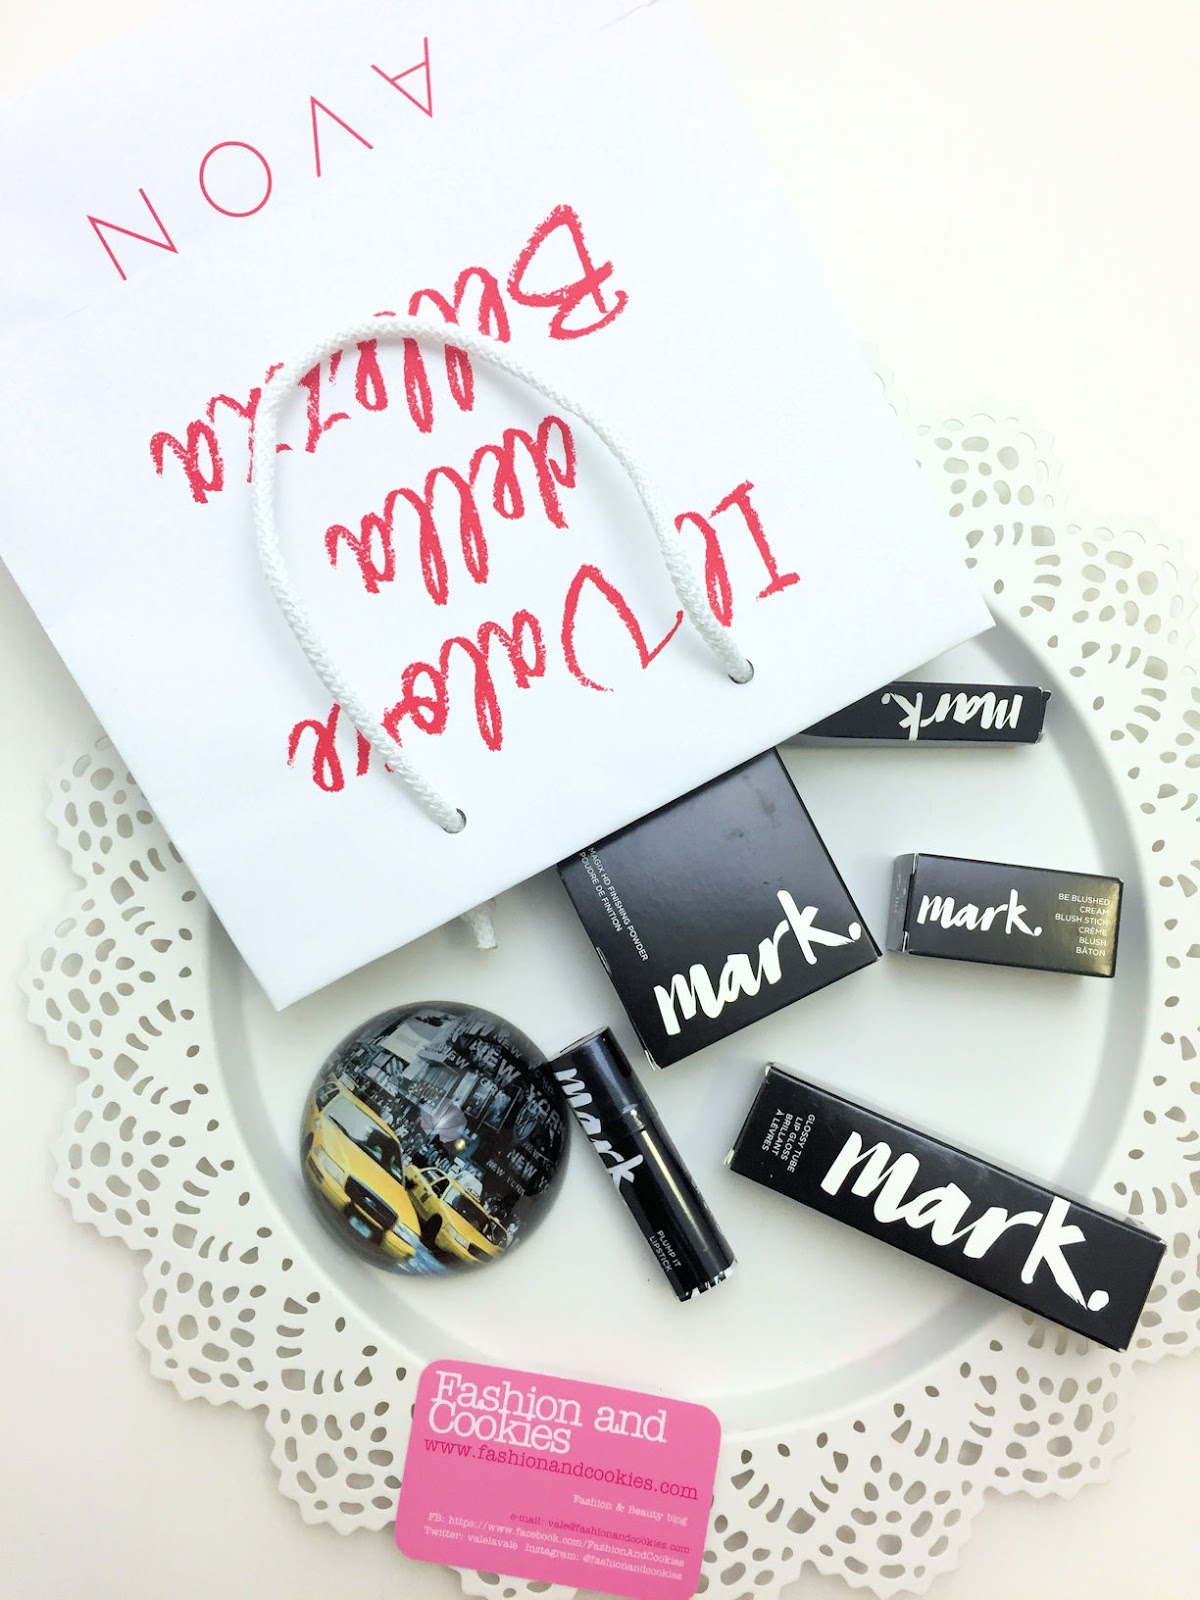 Avon Mark: makeup must have, recensione su Fashion and Cookies beauty blog, beauty blogger